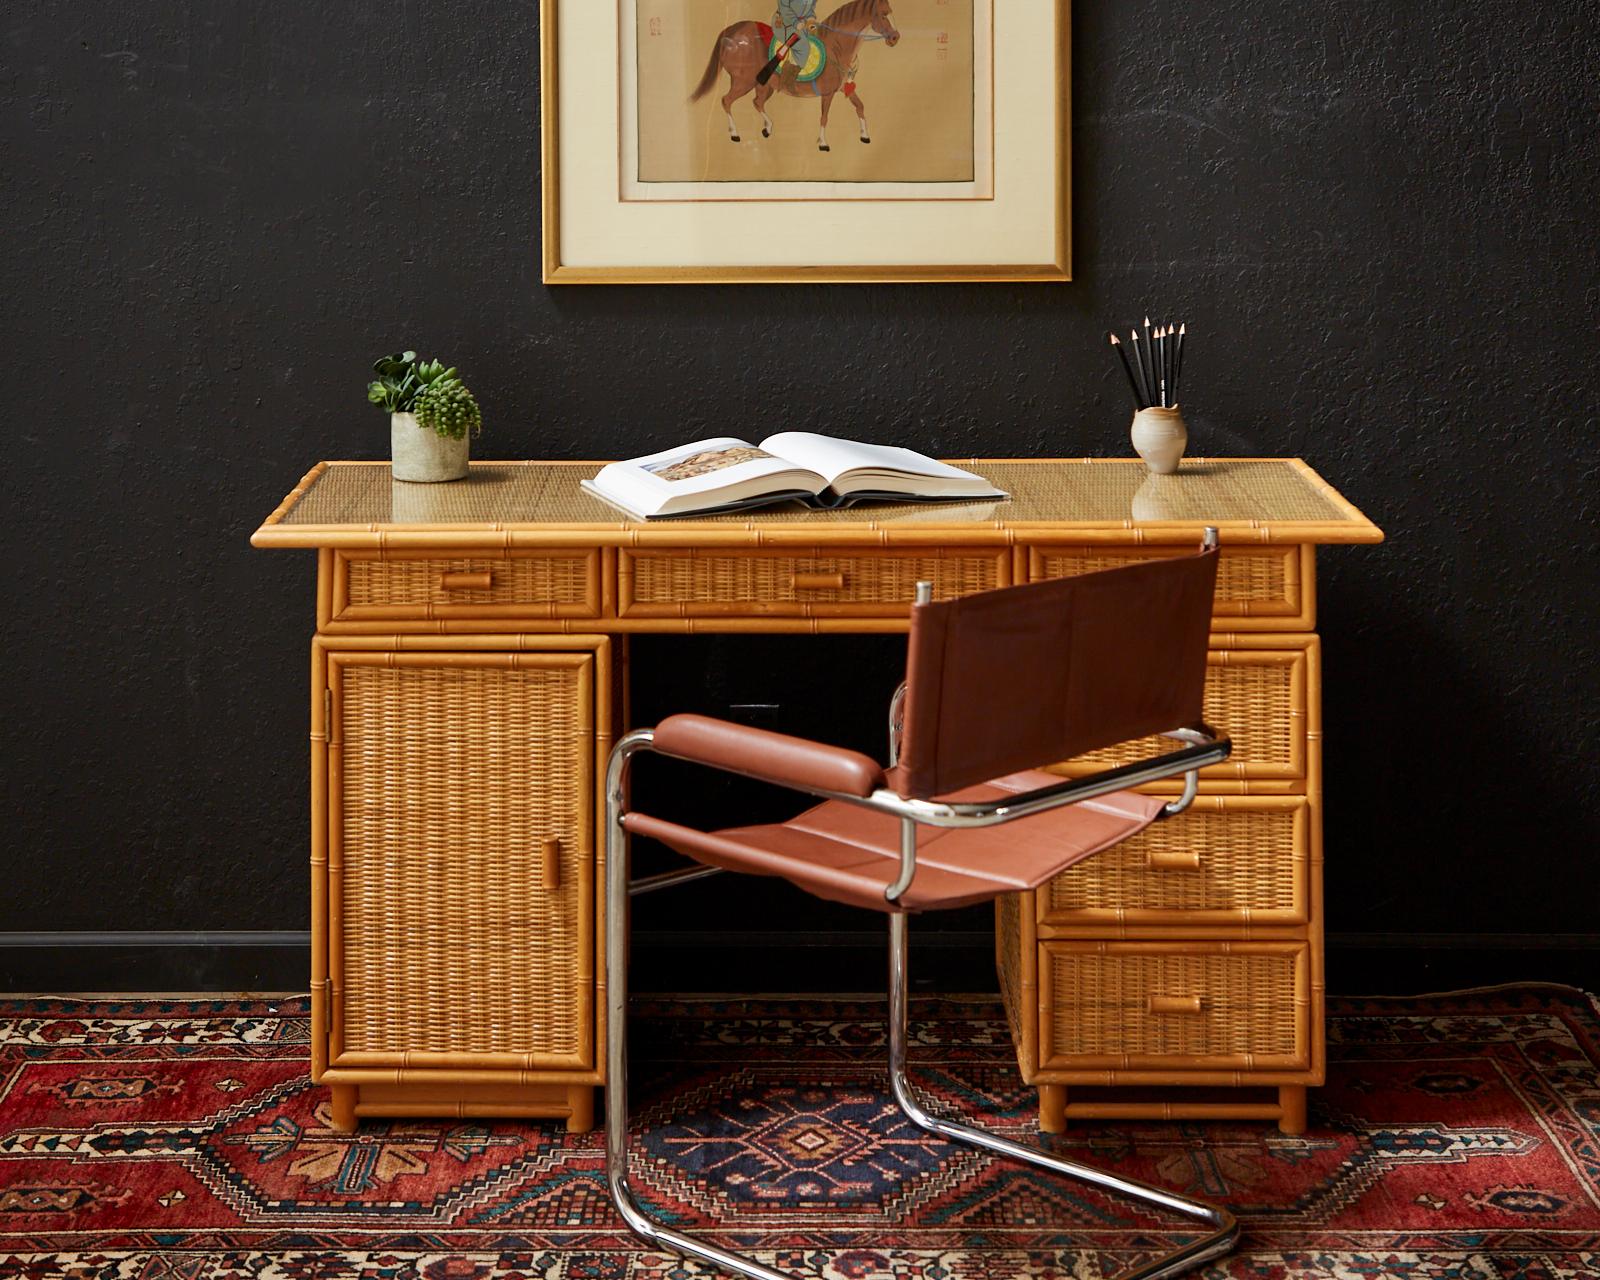 Mid-Century Modern Italian pedestal style writing table or desk. Crafted in the Campaign style with a removable top section and two pedestals. The case features decorative carved faux bamboo trim and wicker rattan inset. The top of the desk has a